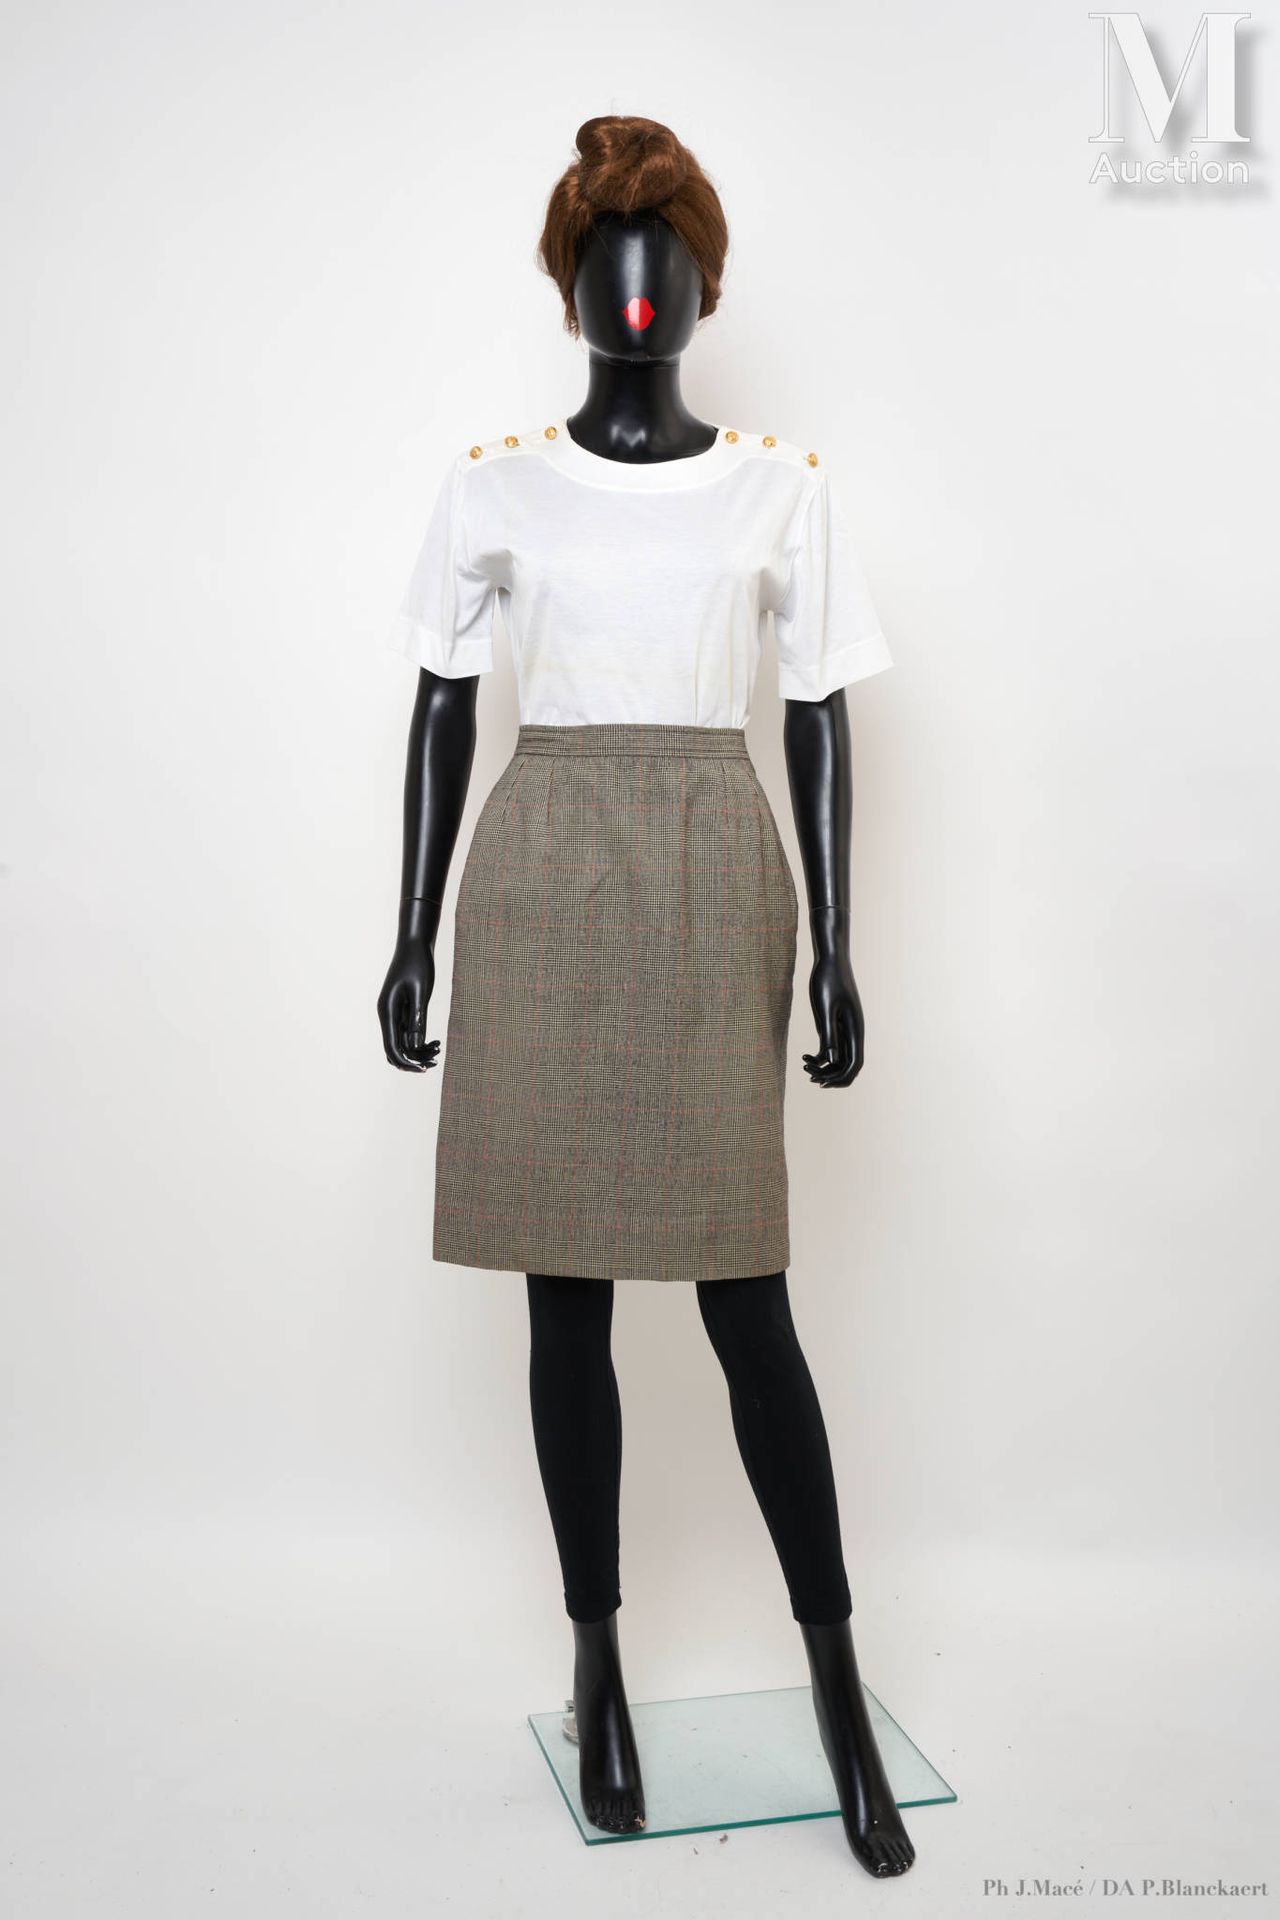 YVES SAINT LAURENT RIVE GAUCHE - 1990's Skirt
in ivory wool squared black and re&hellip;